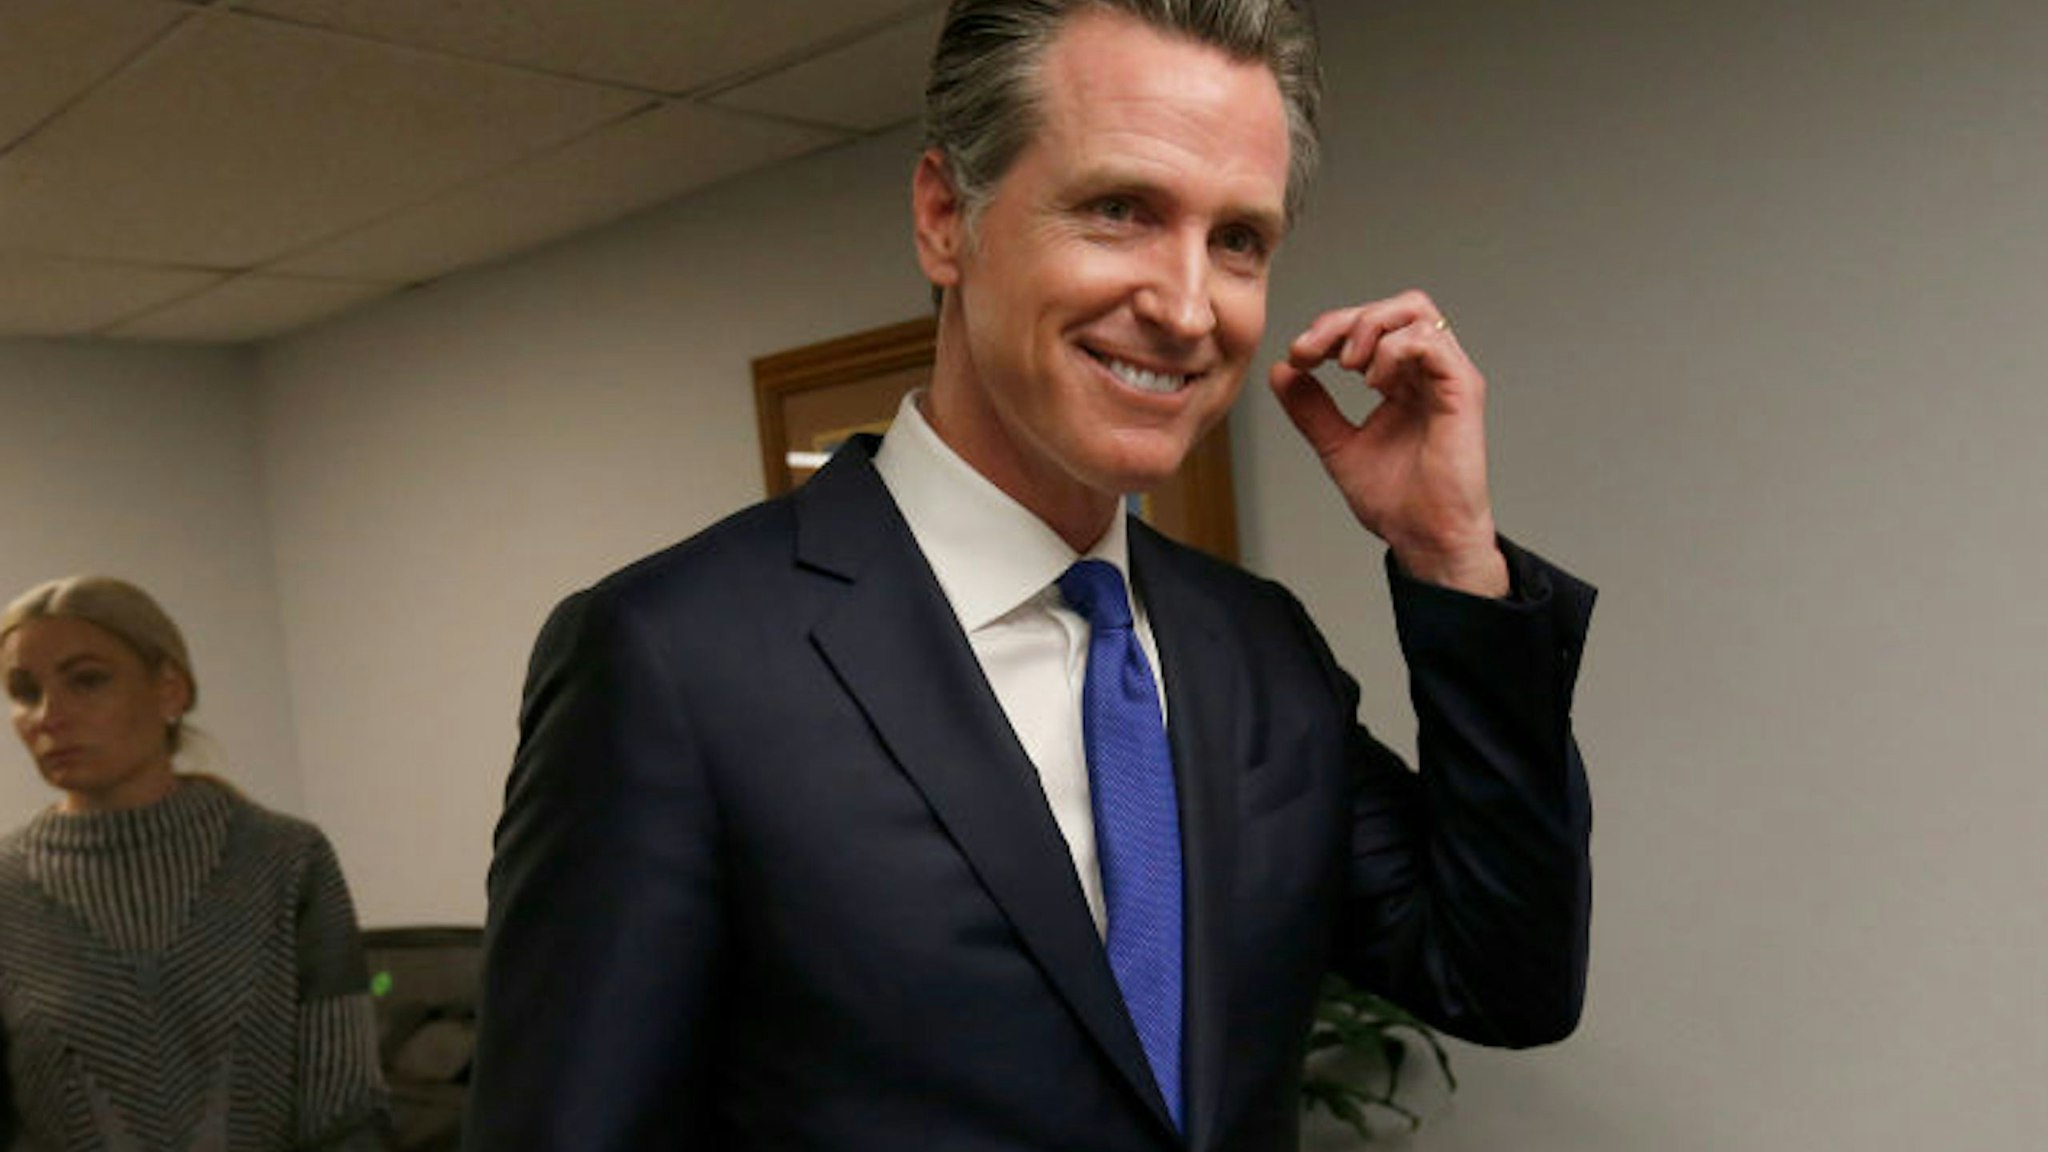 OAKLAND, CA - MAY 21: California Governor Gavin Newsom departs after a press conference at the Henry Robinson Multi-Service Center in Oakland, Calif., on Tuesday, May 21, 2019. Newsom announced the formation of the Homeless &amp; Supportive Housing Advisory Task Force and has pledged $1billion of the state budget to fight homelessness.